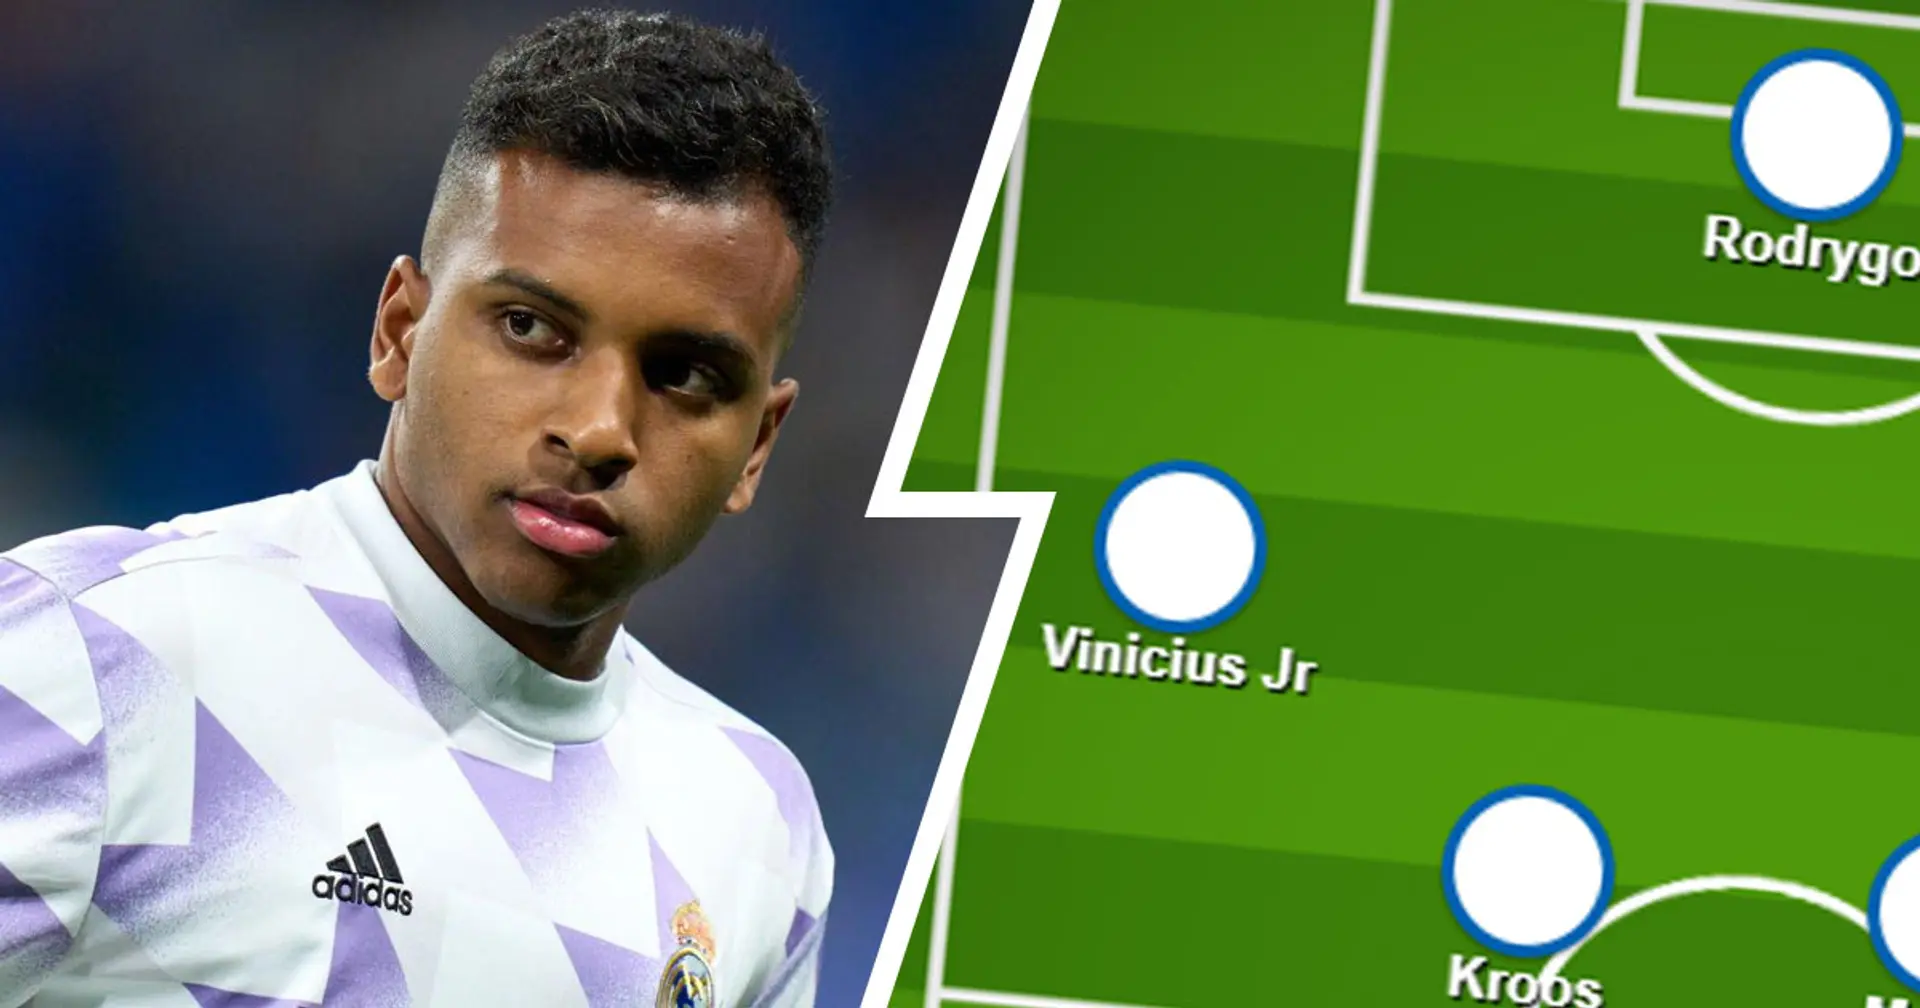 Rodrygo to play striker: team news and expected lineups for Getafe v Real Madrid